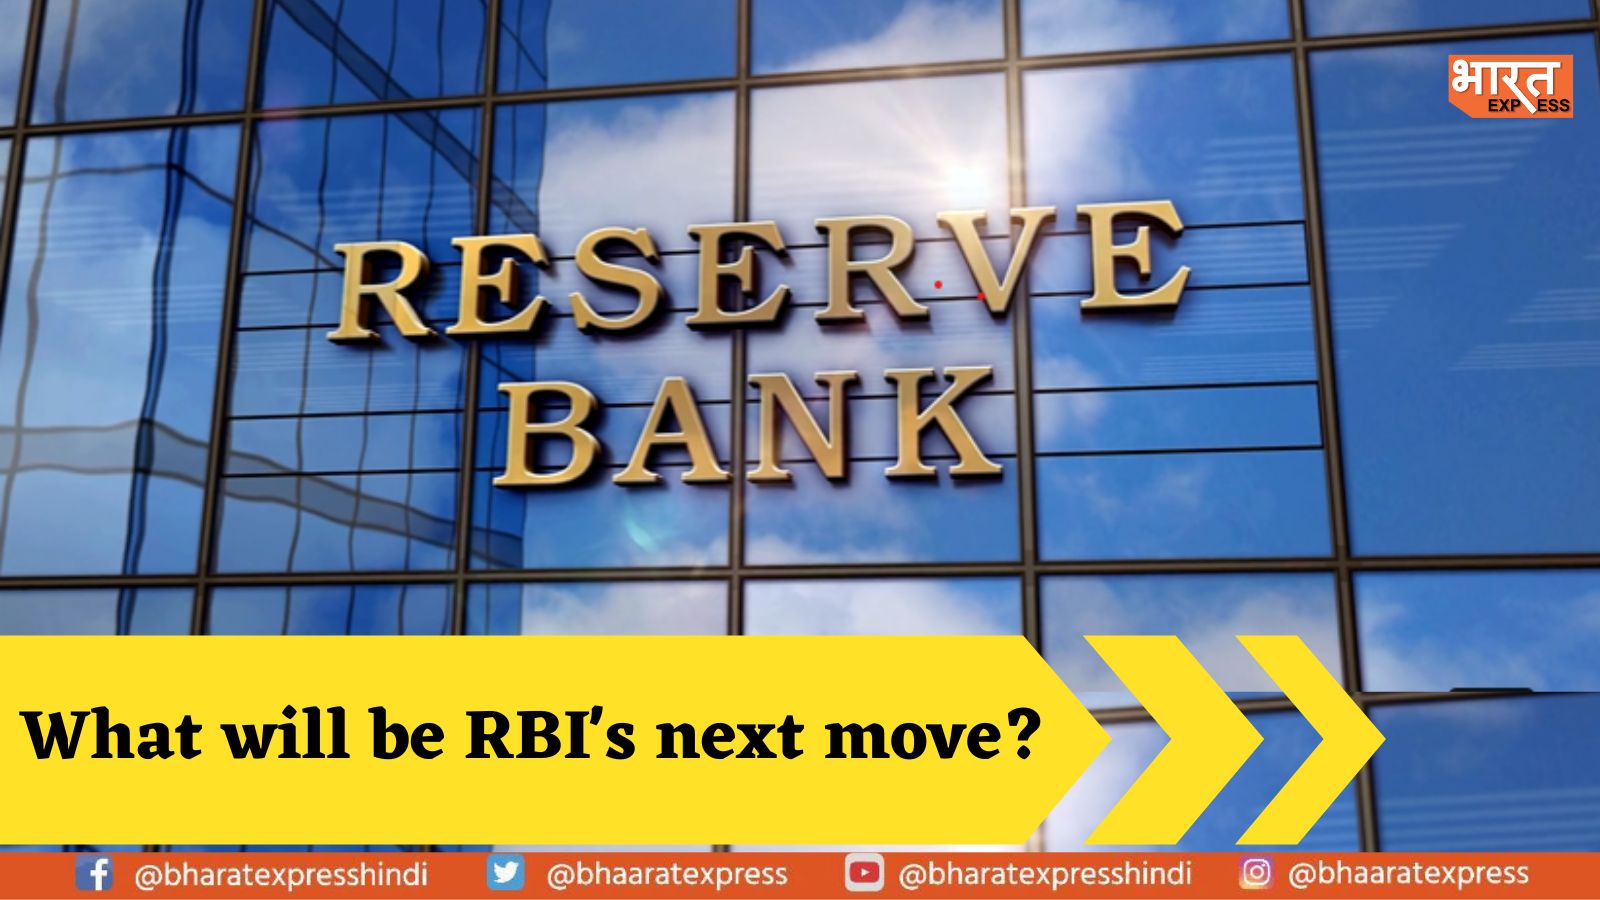 RBI Likely to Raise Interest Rates by 25 Basis Points in Upcoming Monetary Policy Meeting